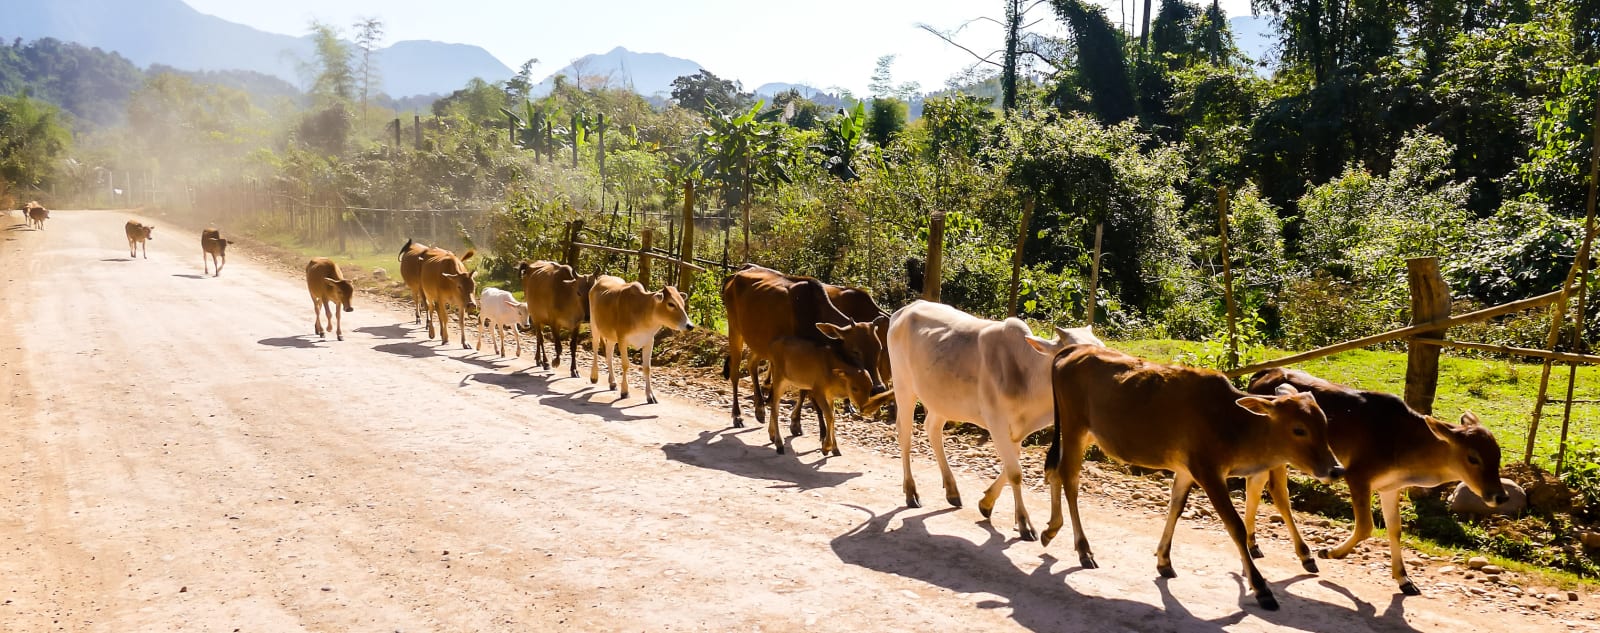 Line of small cows walking down a dirt road through a forested area with mountains in the background.